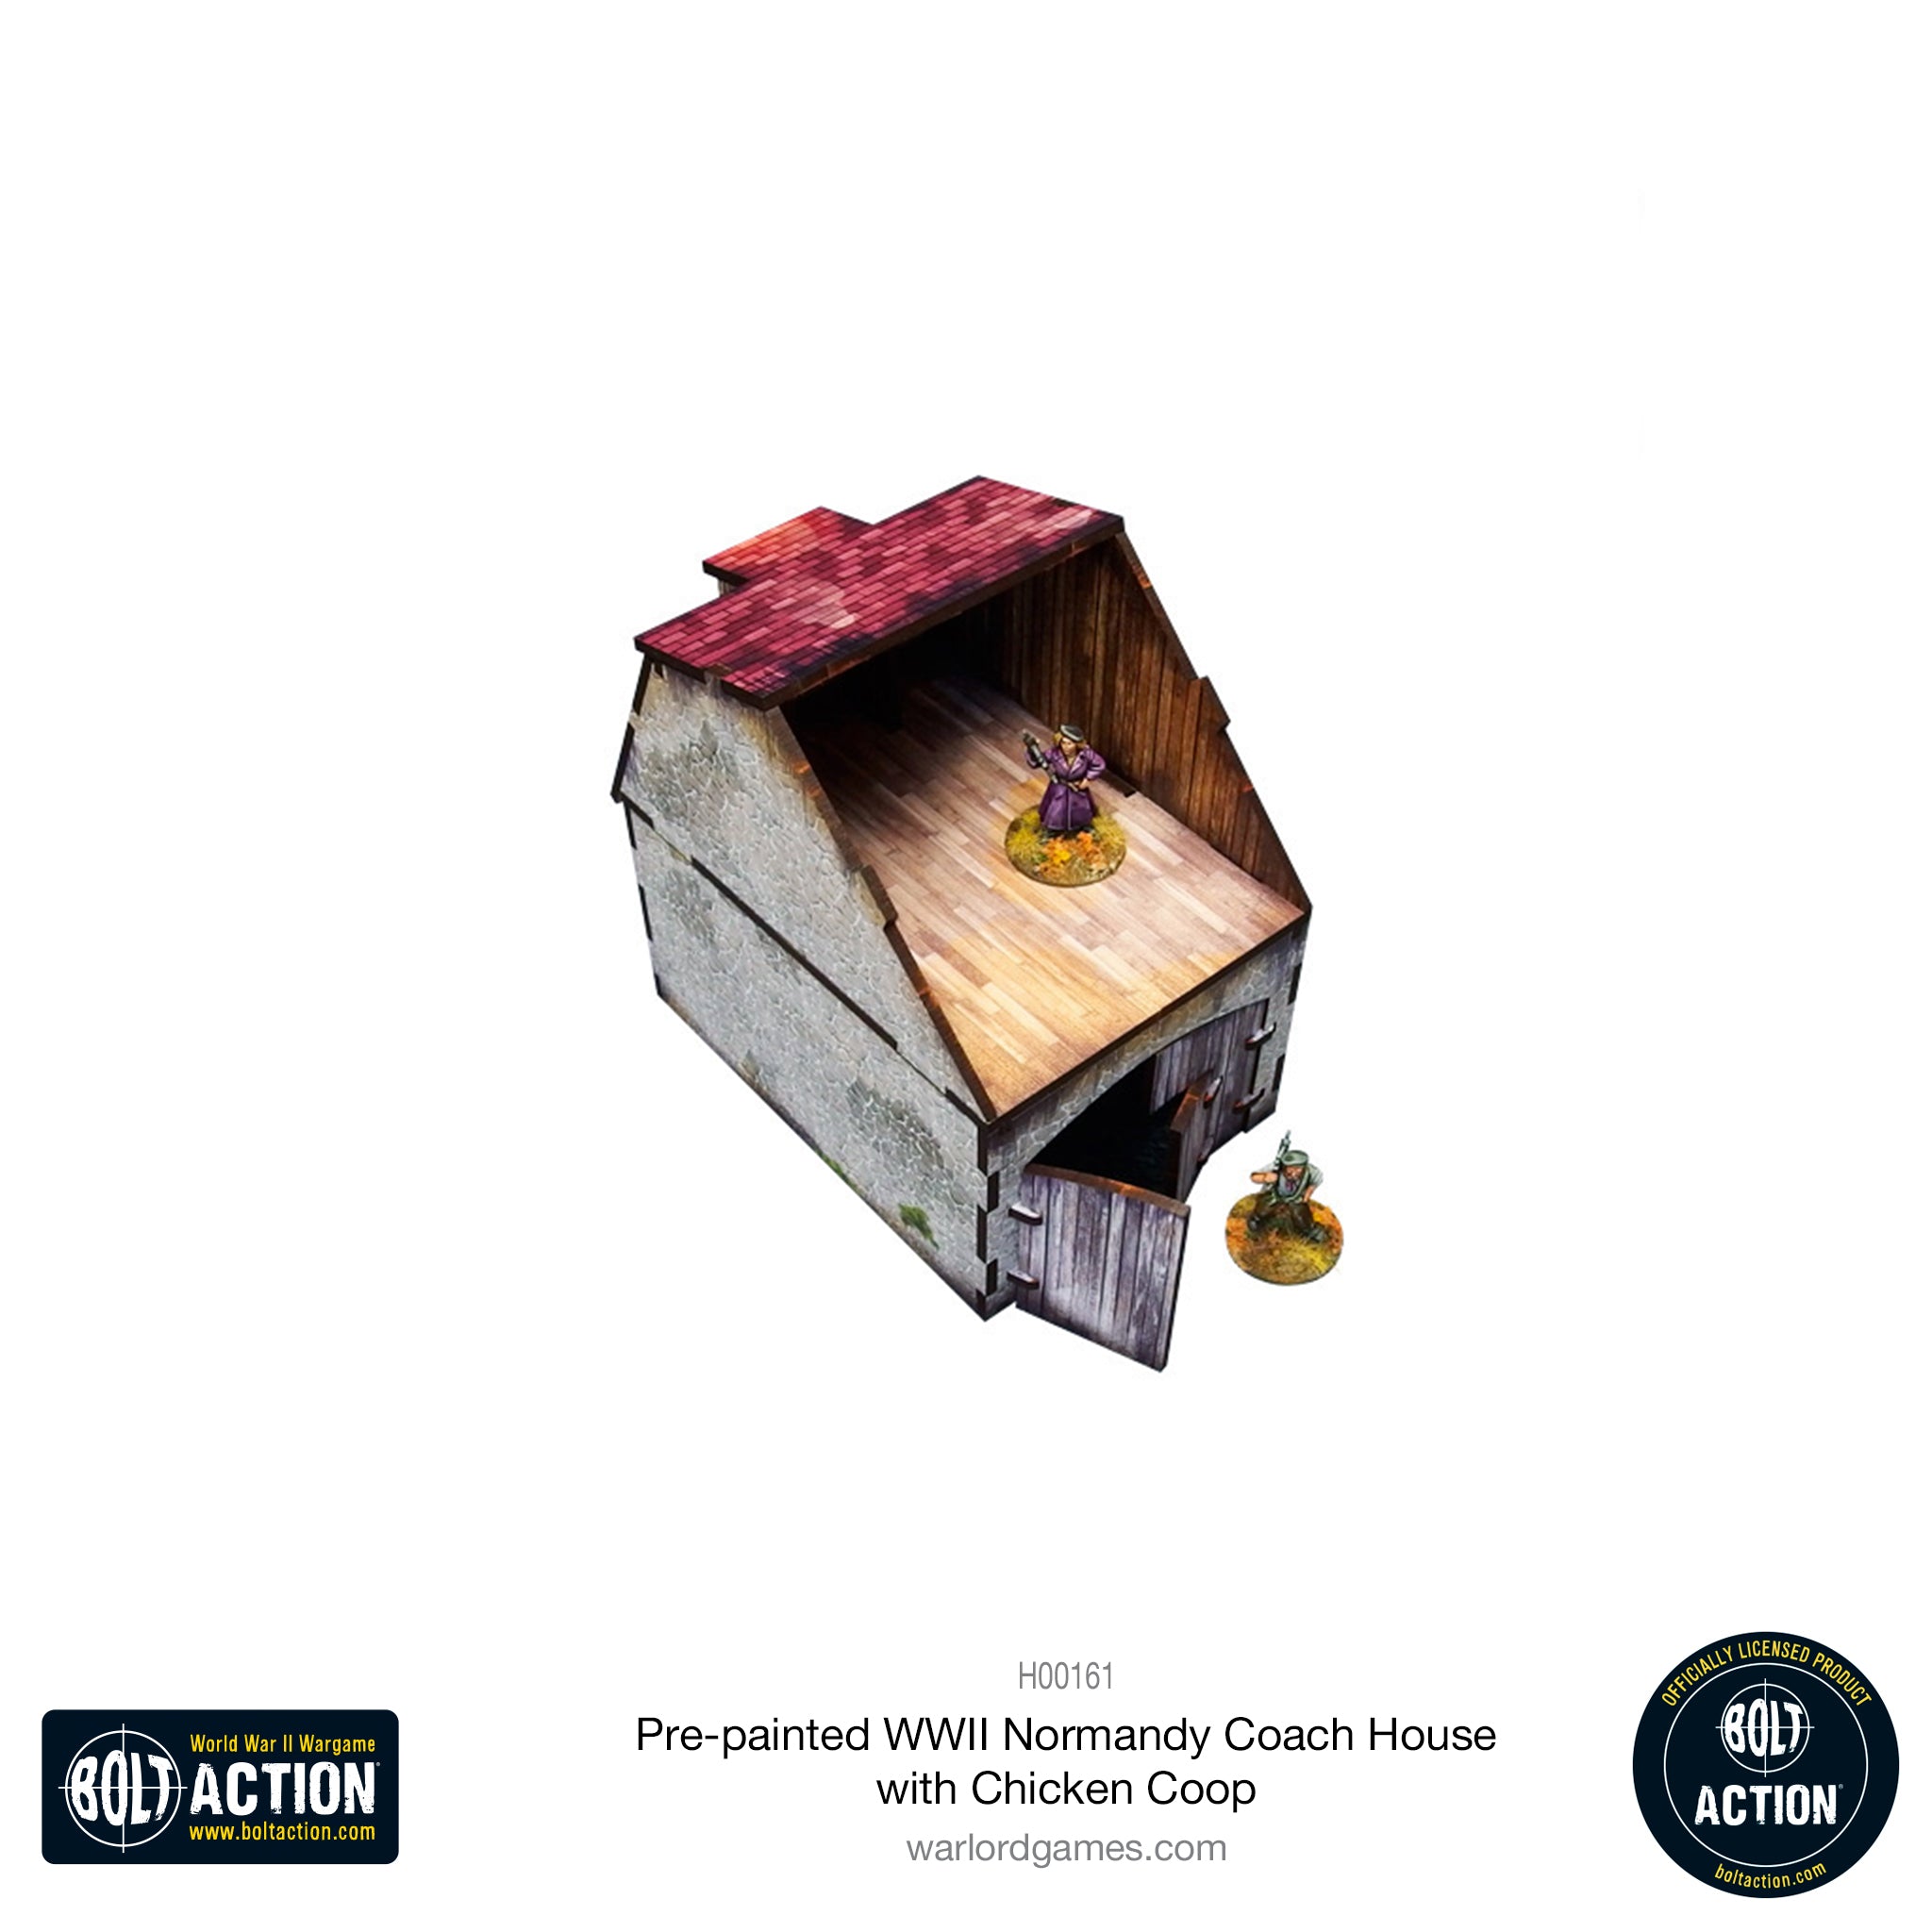 Bolt Action: Pre-painted WWII Normandy Coach House with Chicken Coop